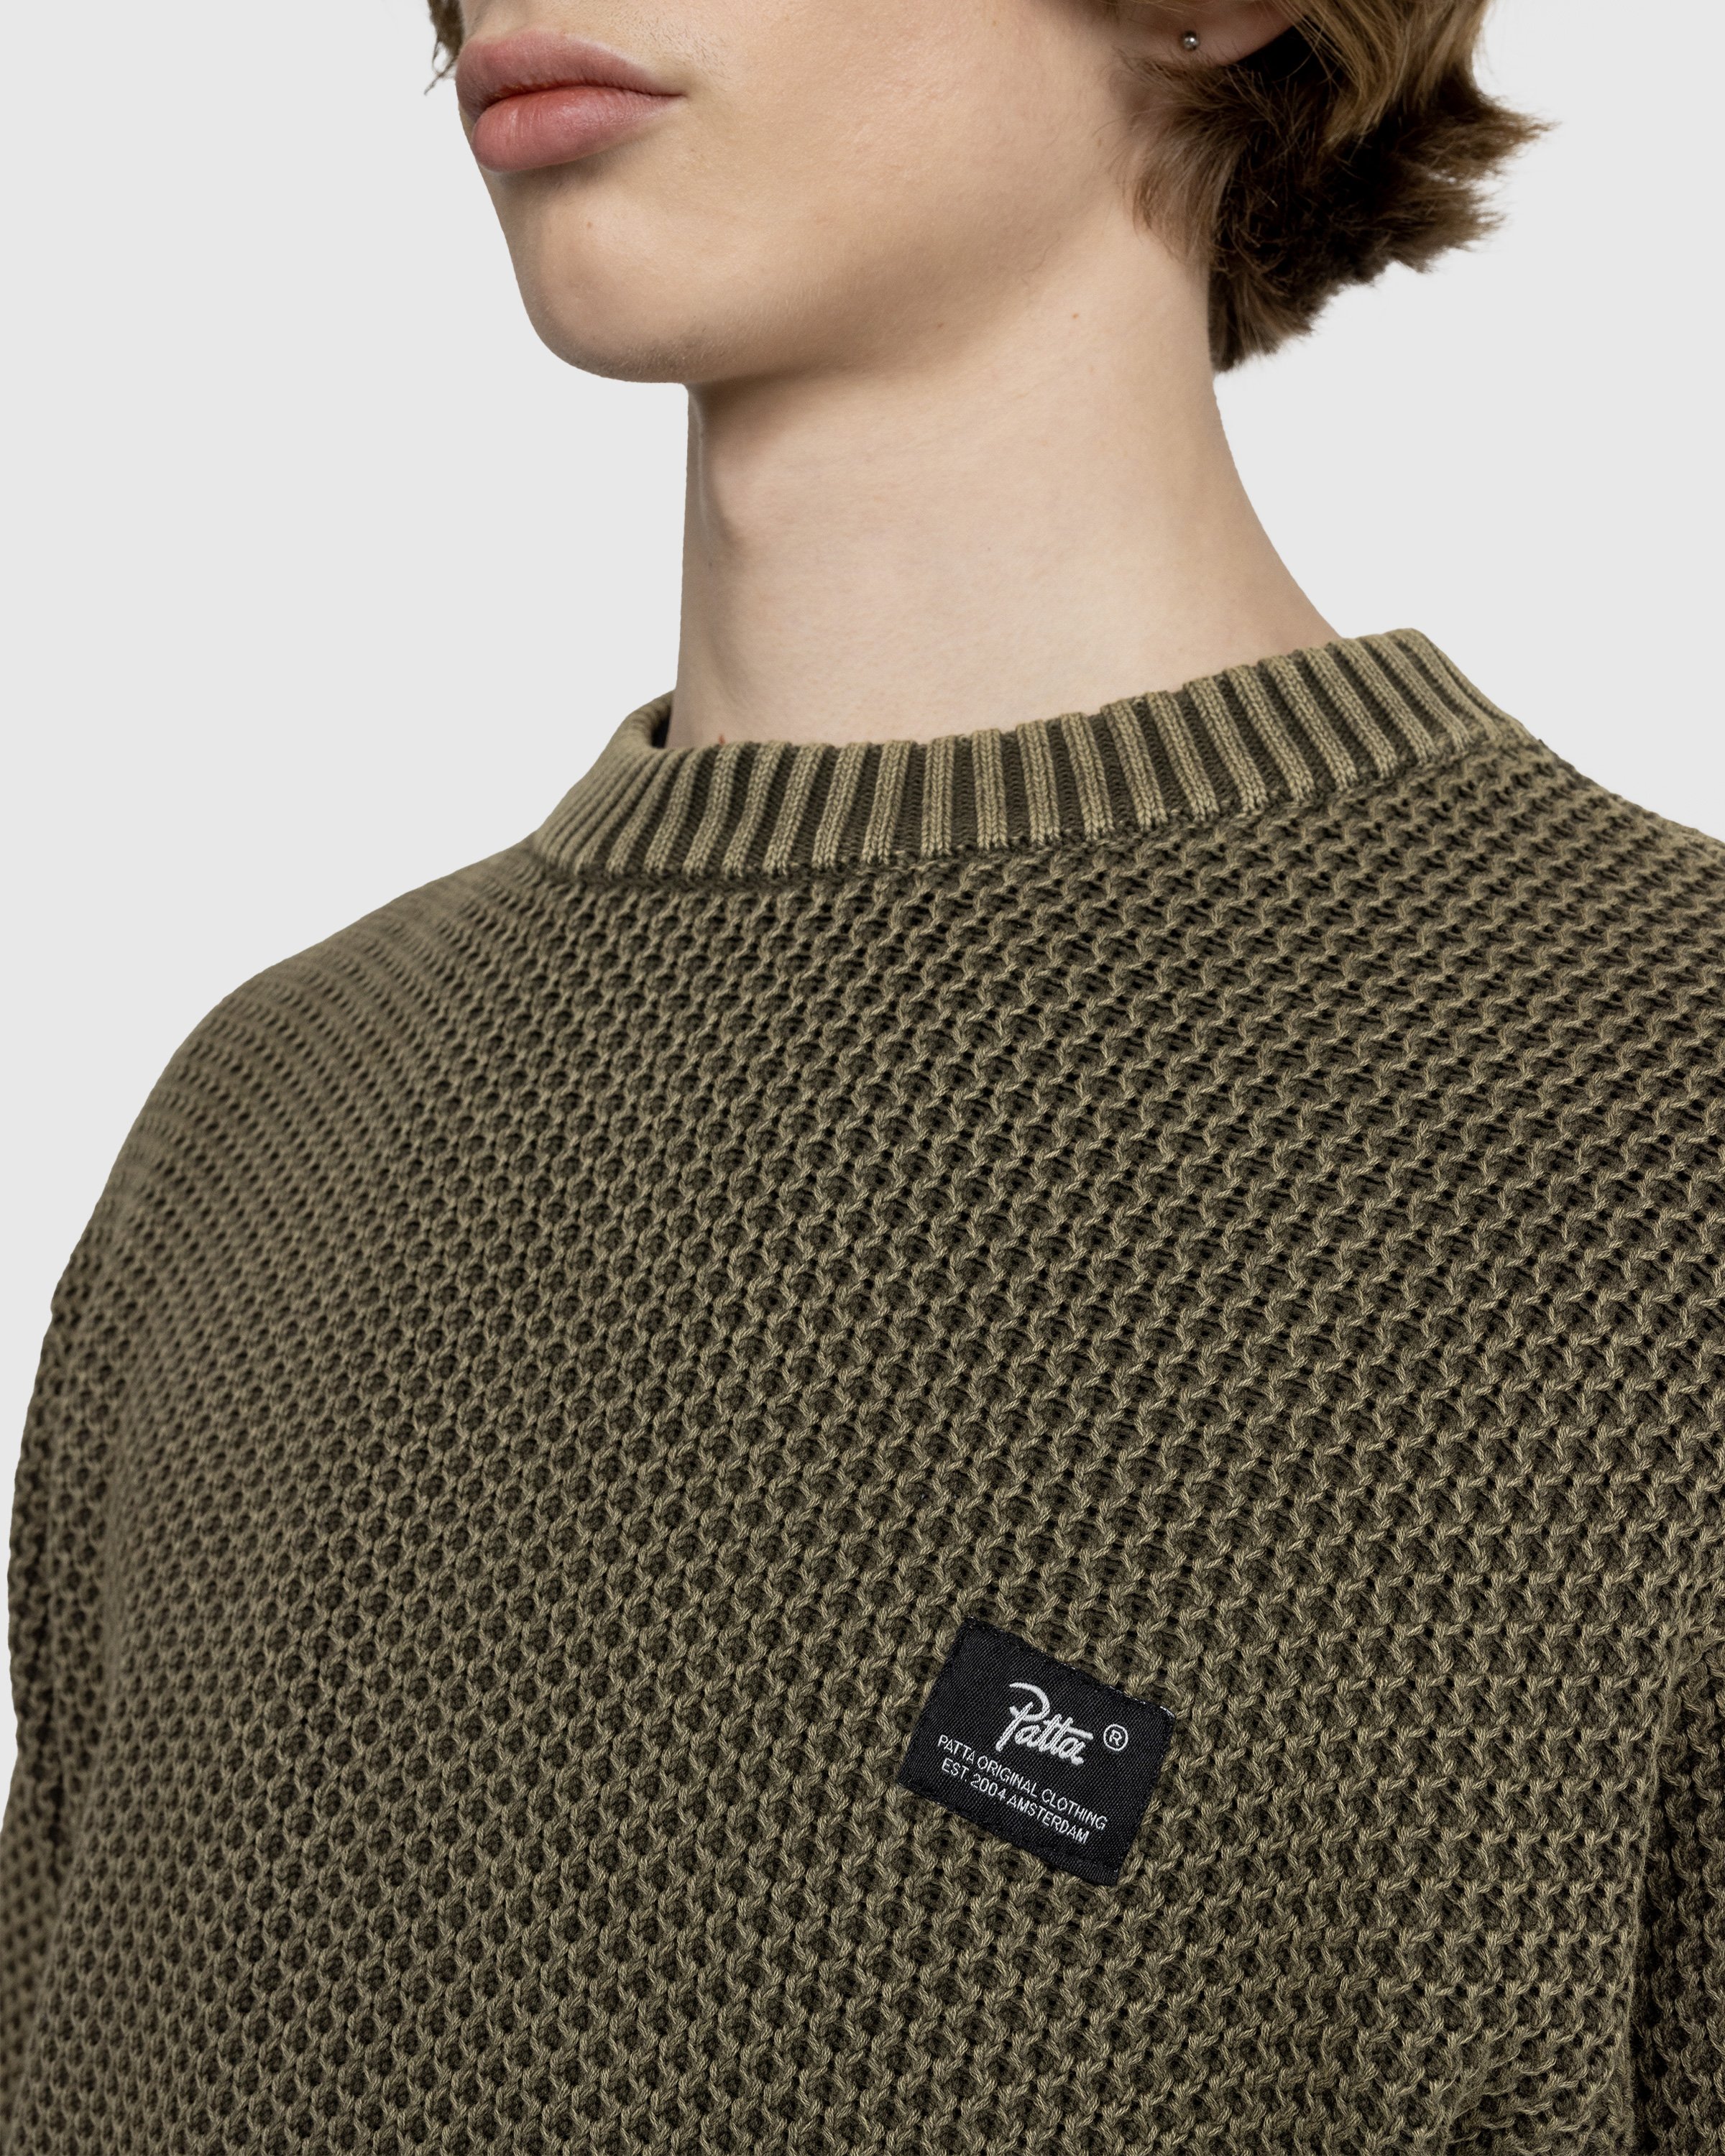 Patta - Honeycomb Knitted Sweater - Clothing - Brown - Image 5